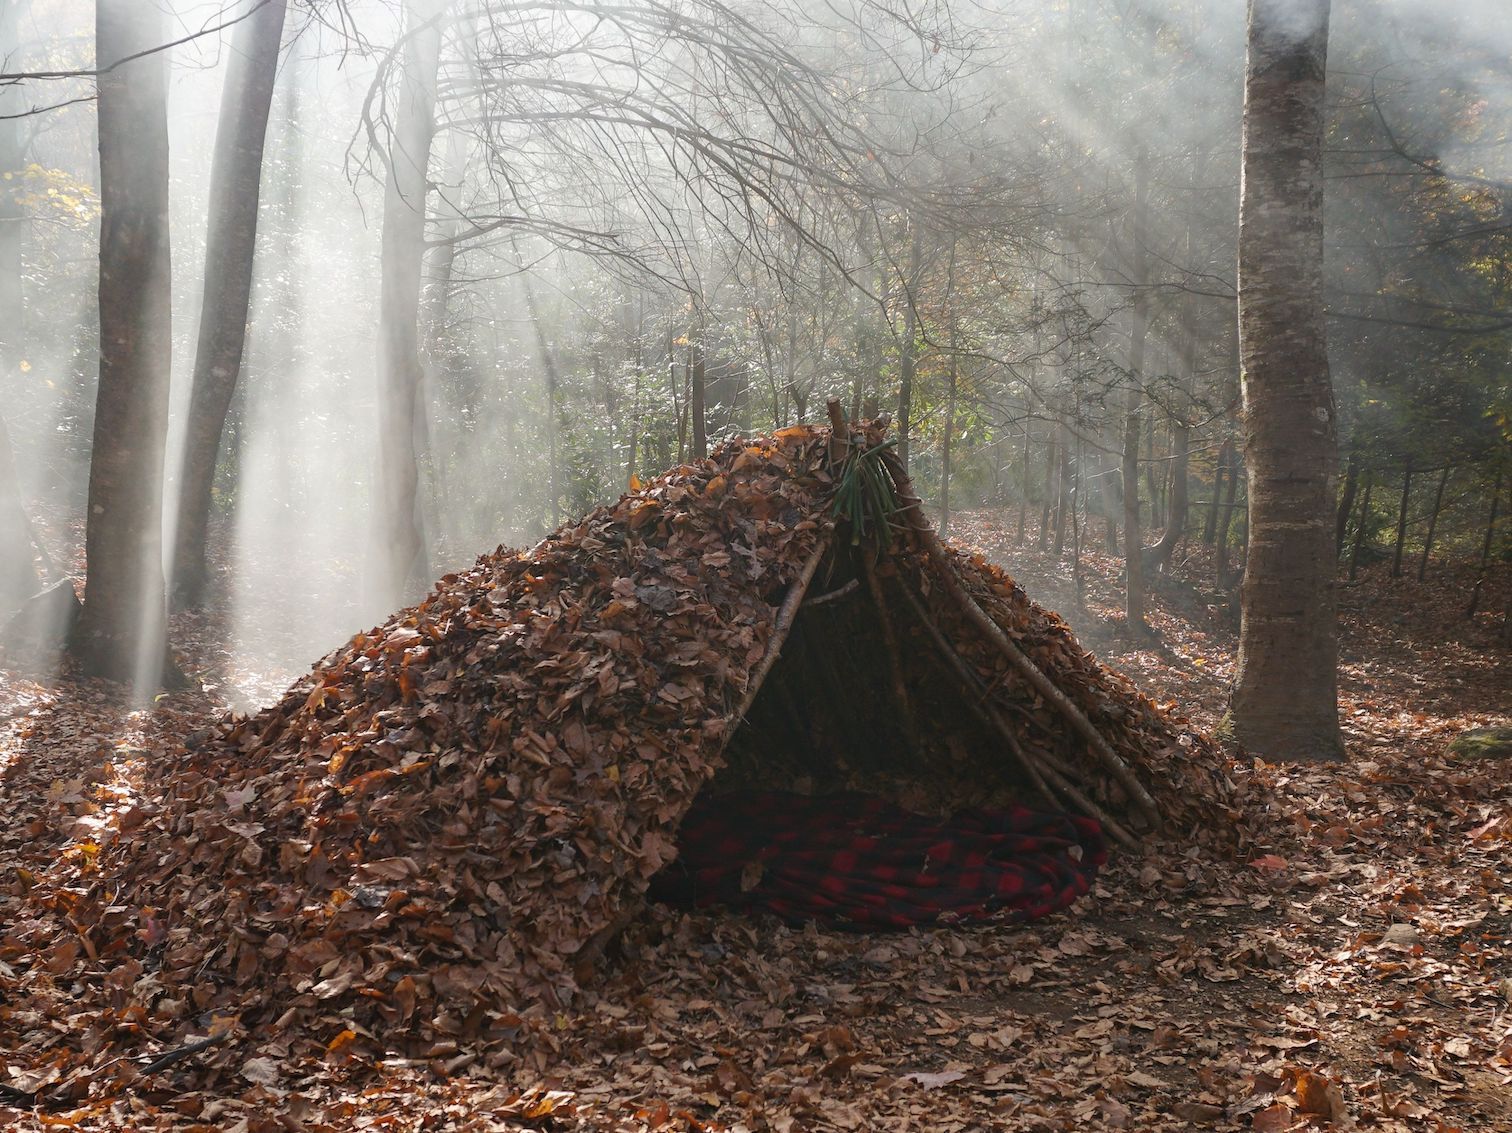 A rustic shelter made waterproof with leaf litter.